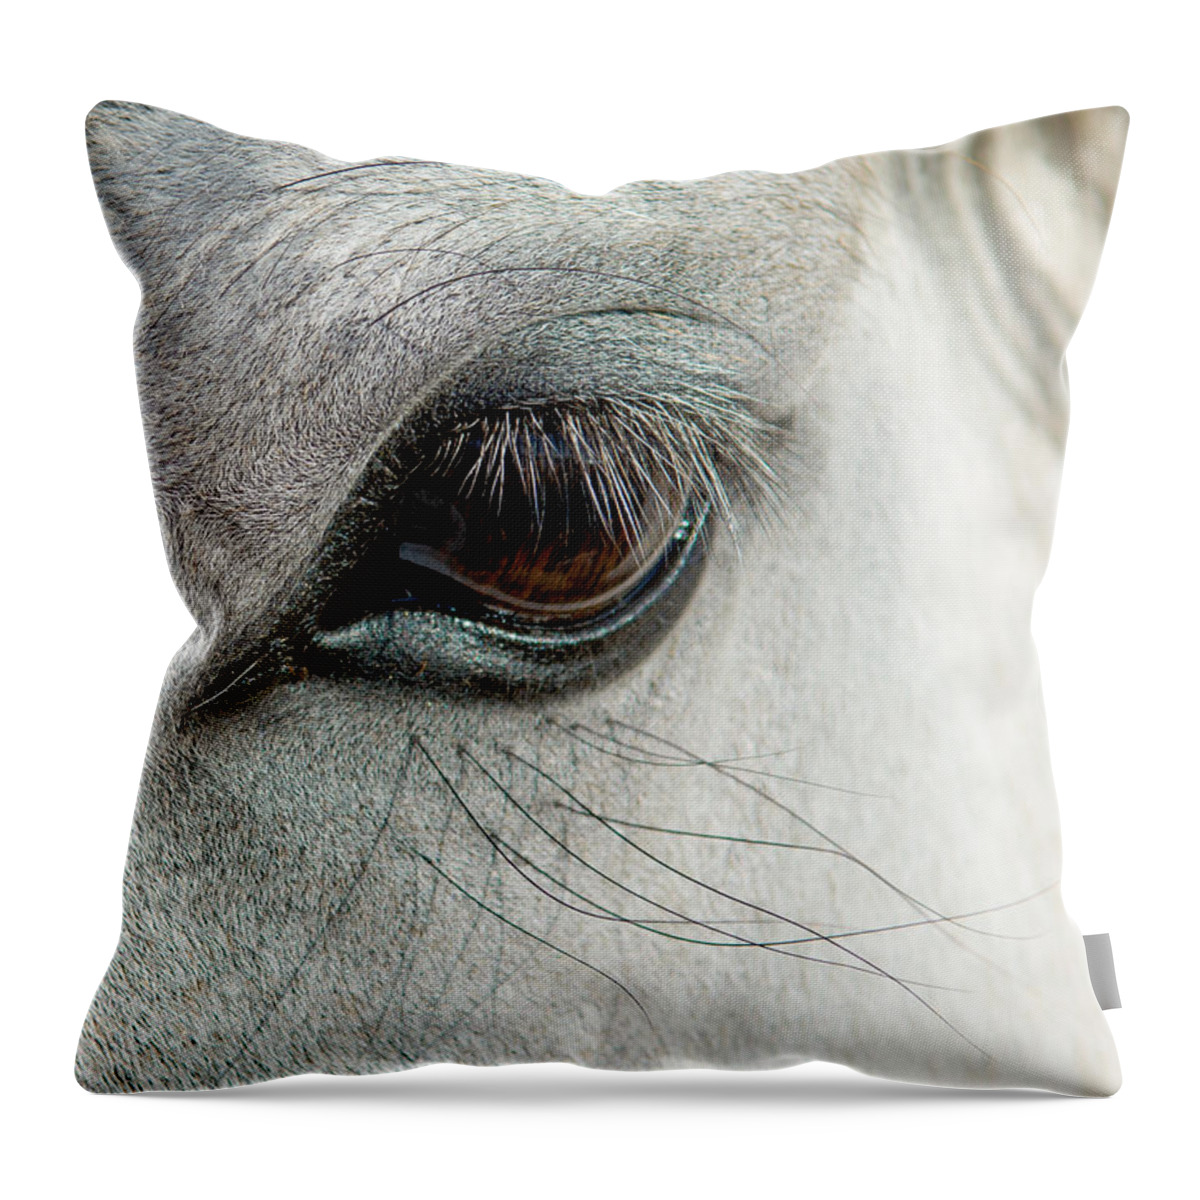 Horse Throw Pillow featuring the photograph White Horse Eye by Andreas Berthold